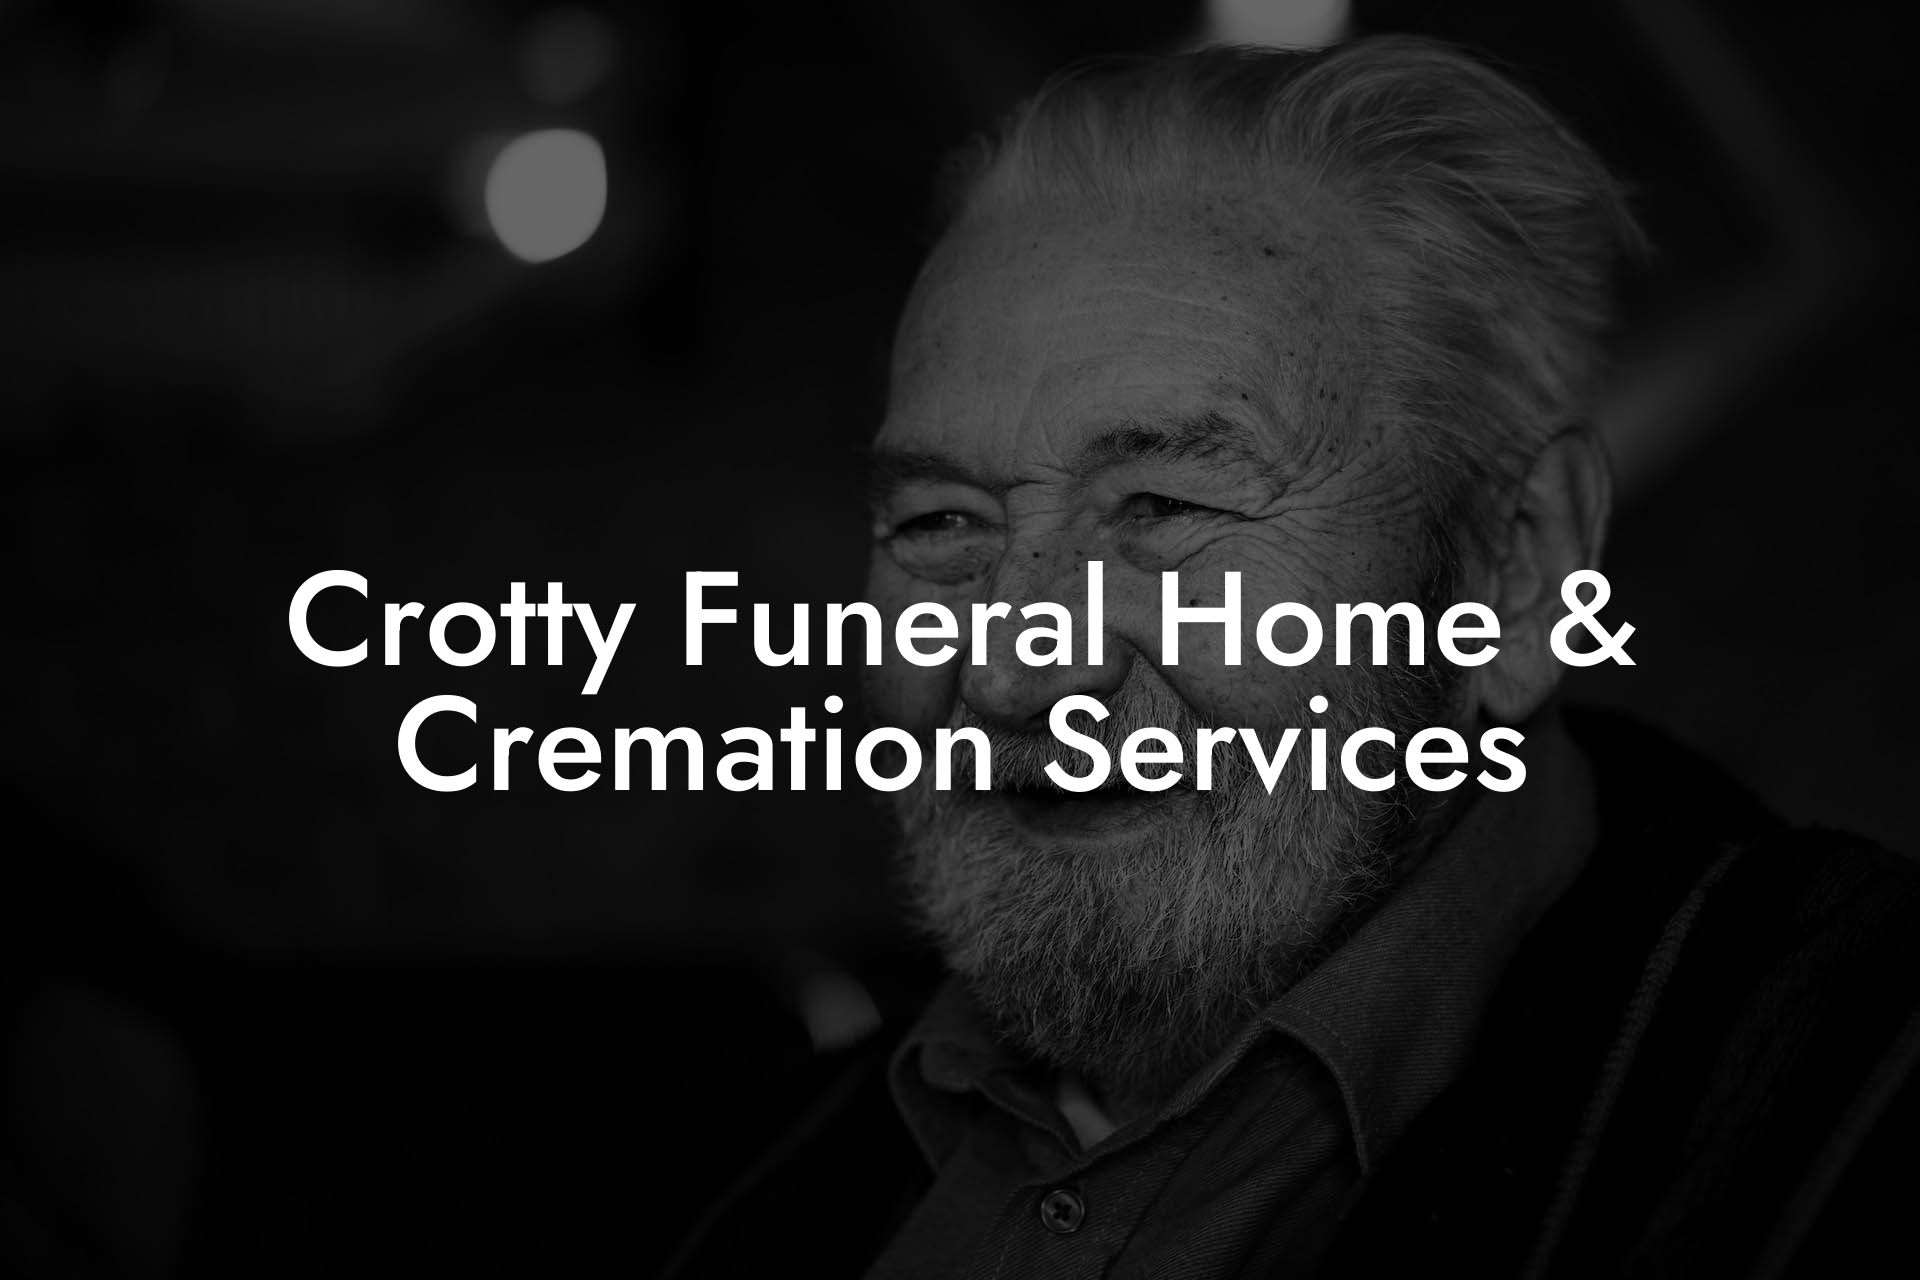 Crotty Funeral Home & Cremation Services